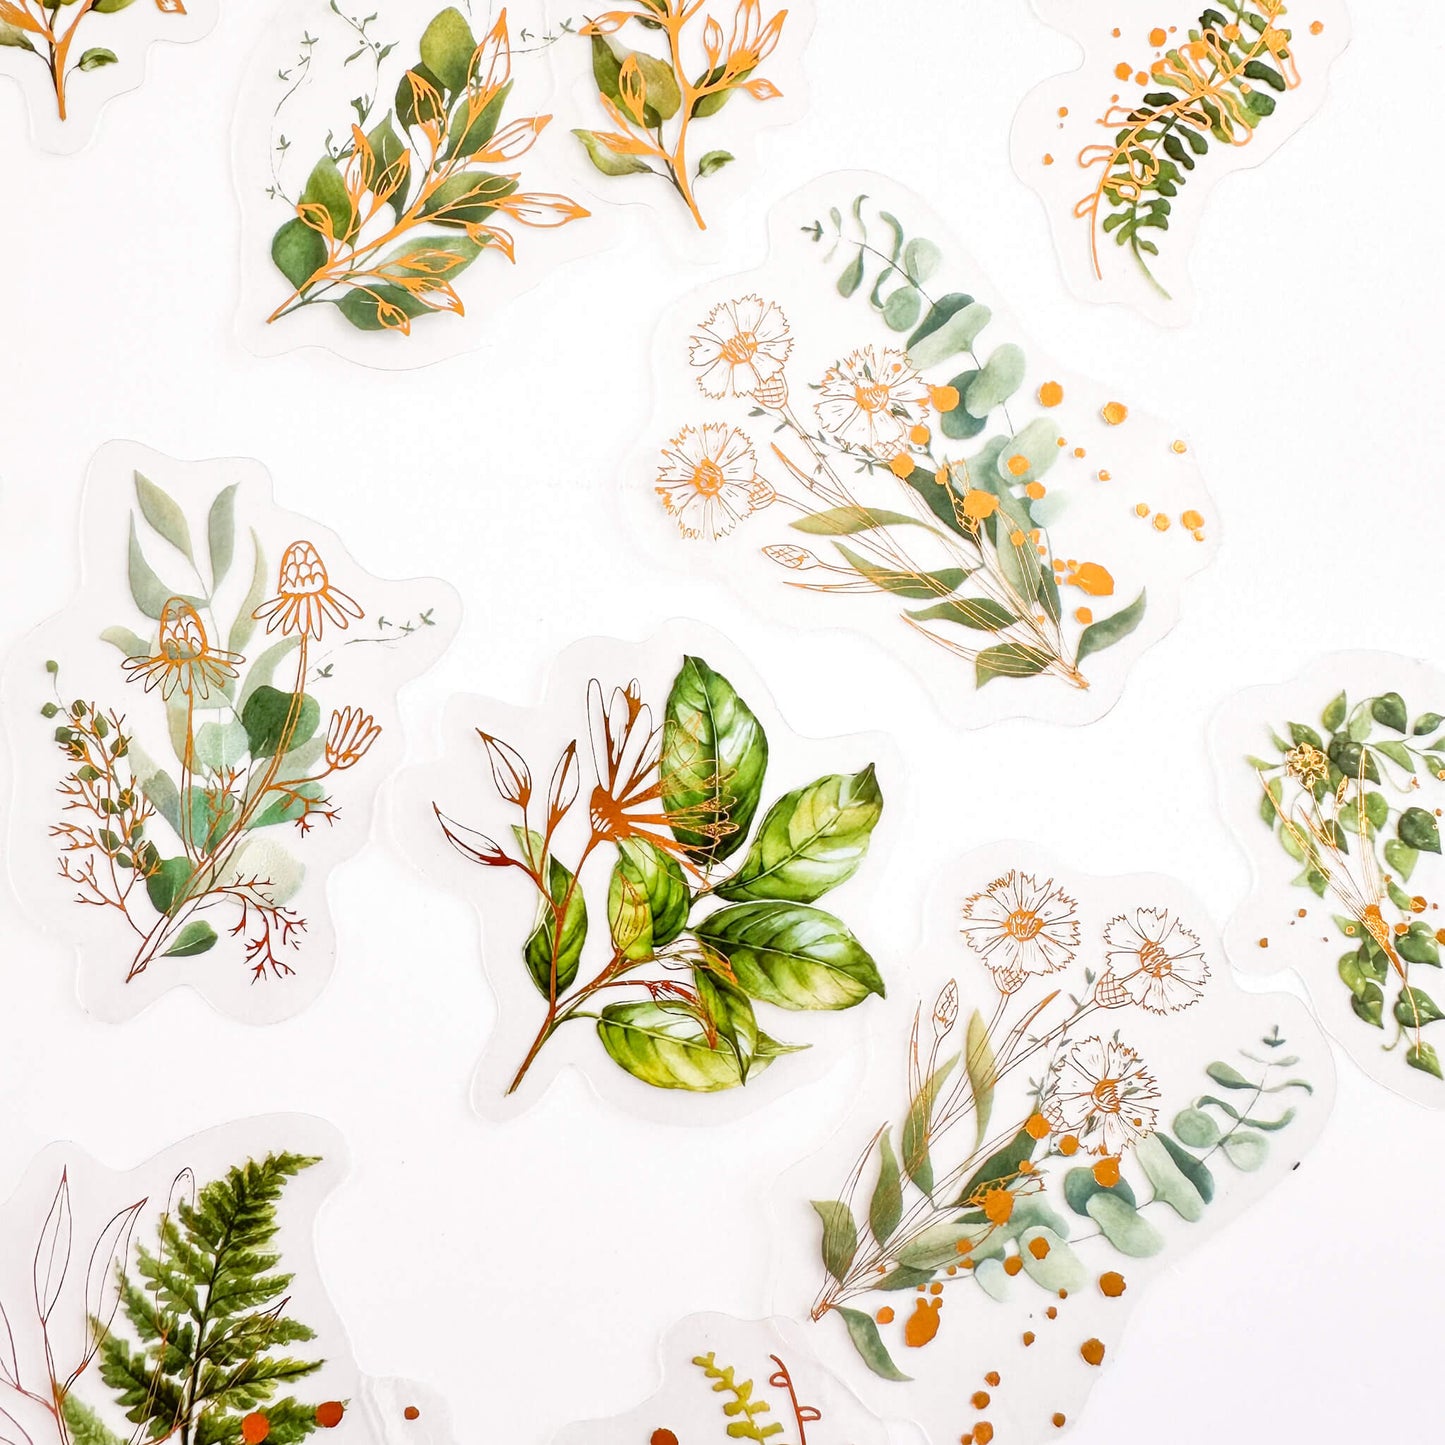 Detail of gold and green leaves stickers. Leaves have a Watercolour look and feel.